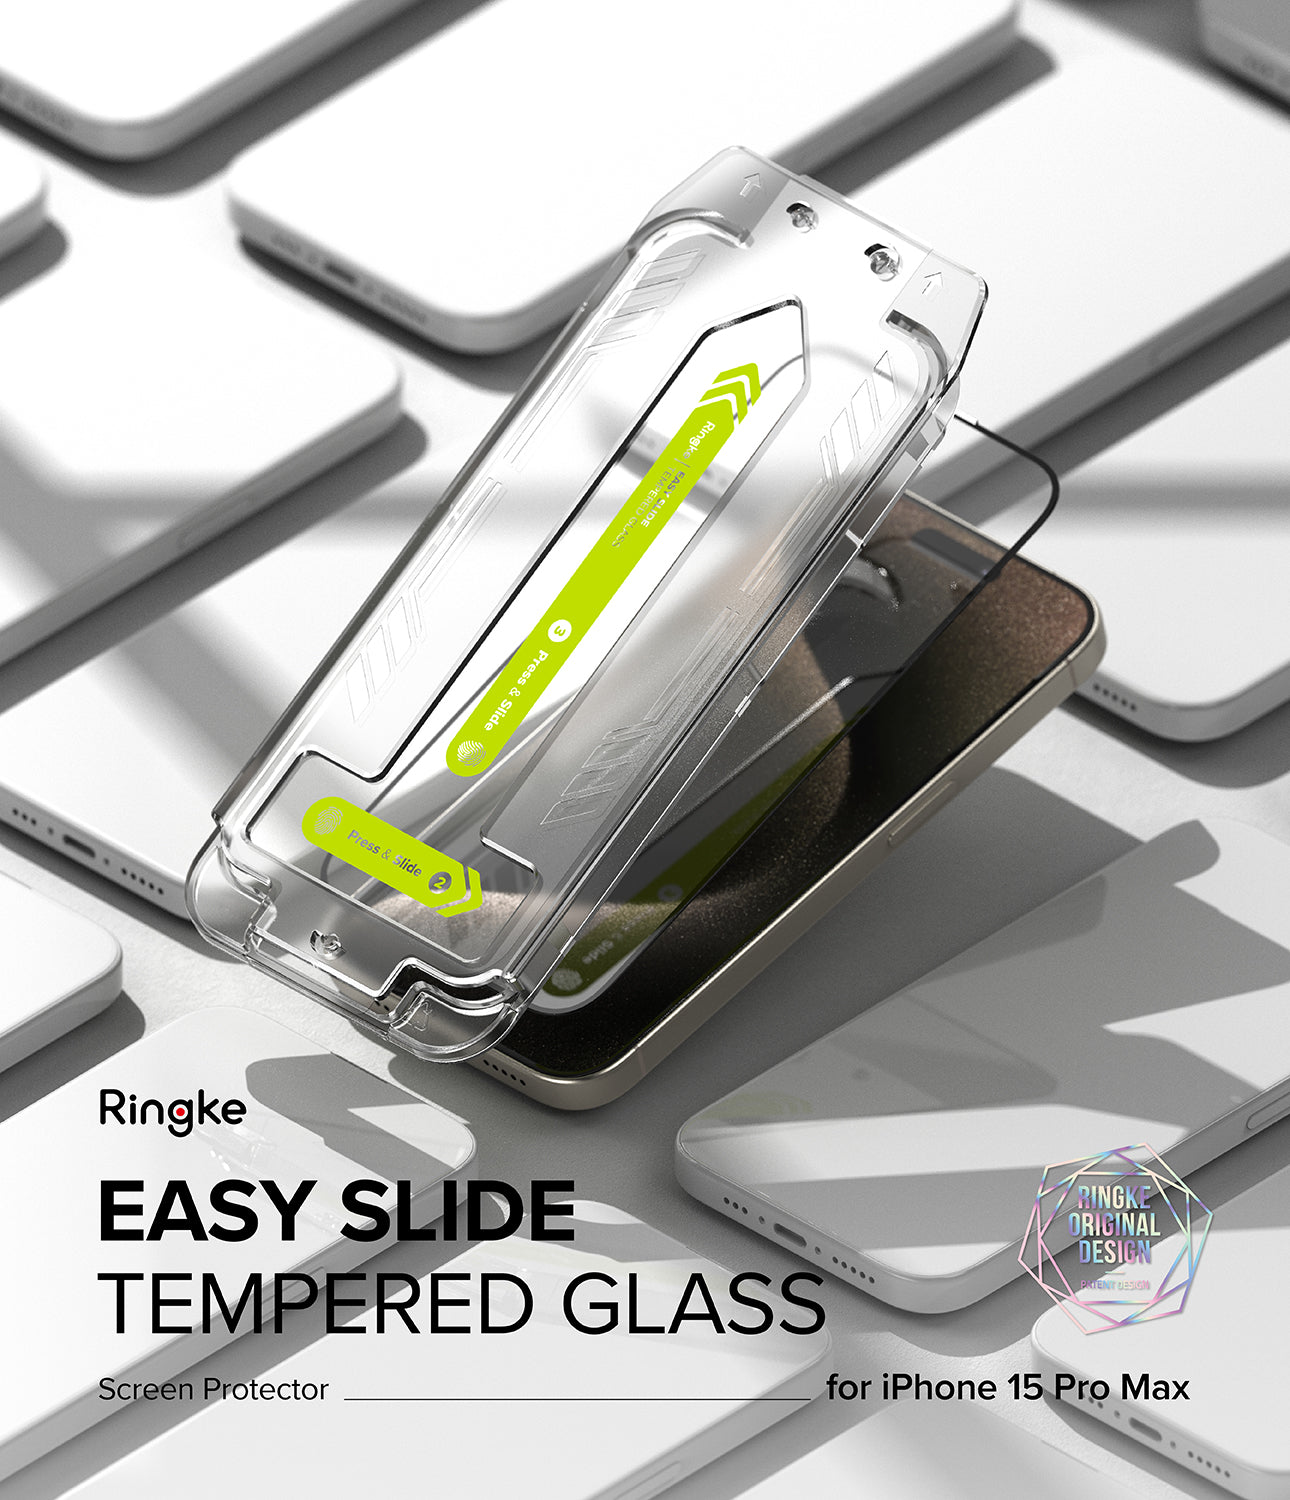 iPhone 15 Pro Max Screen Protector | Easy Slide Tempered Glass - By Ringke